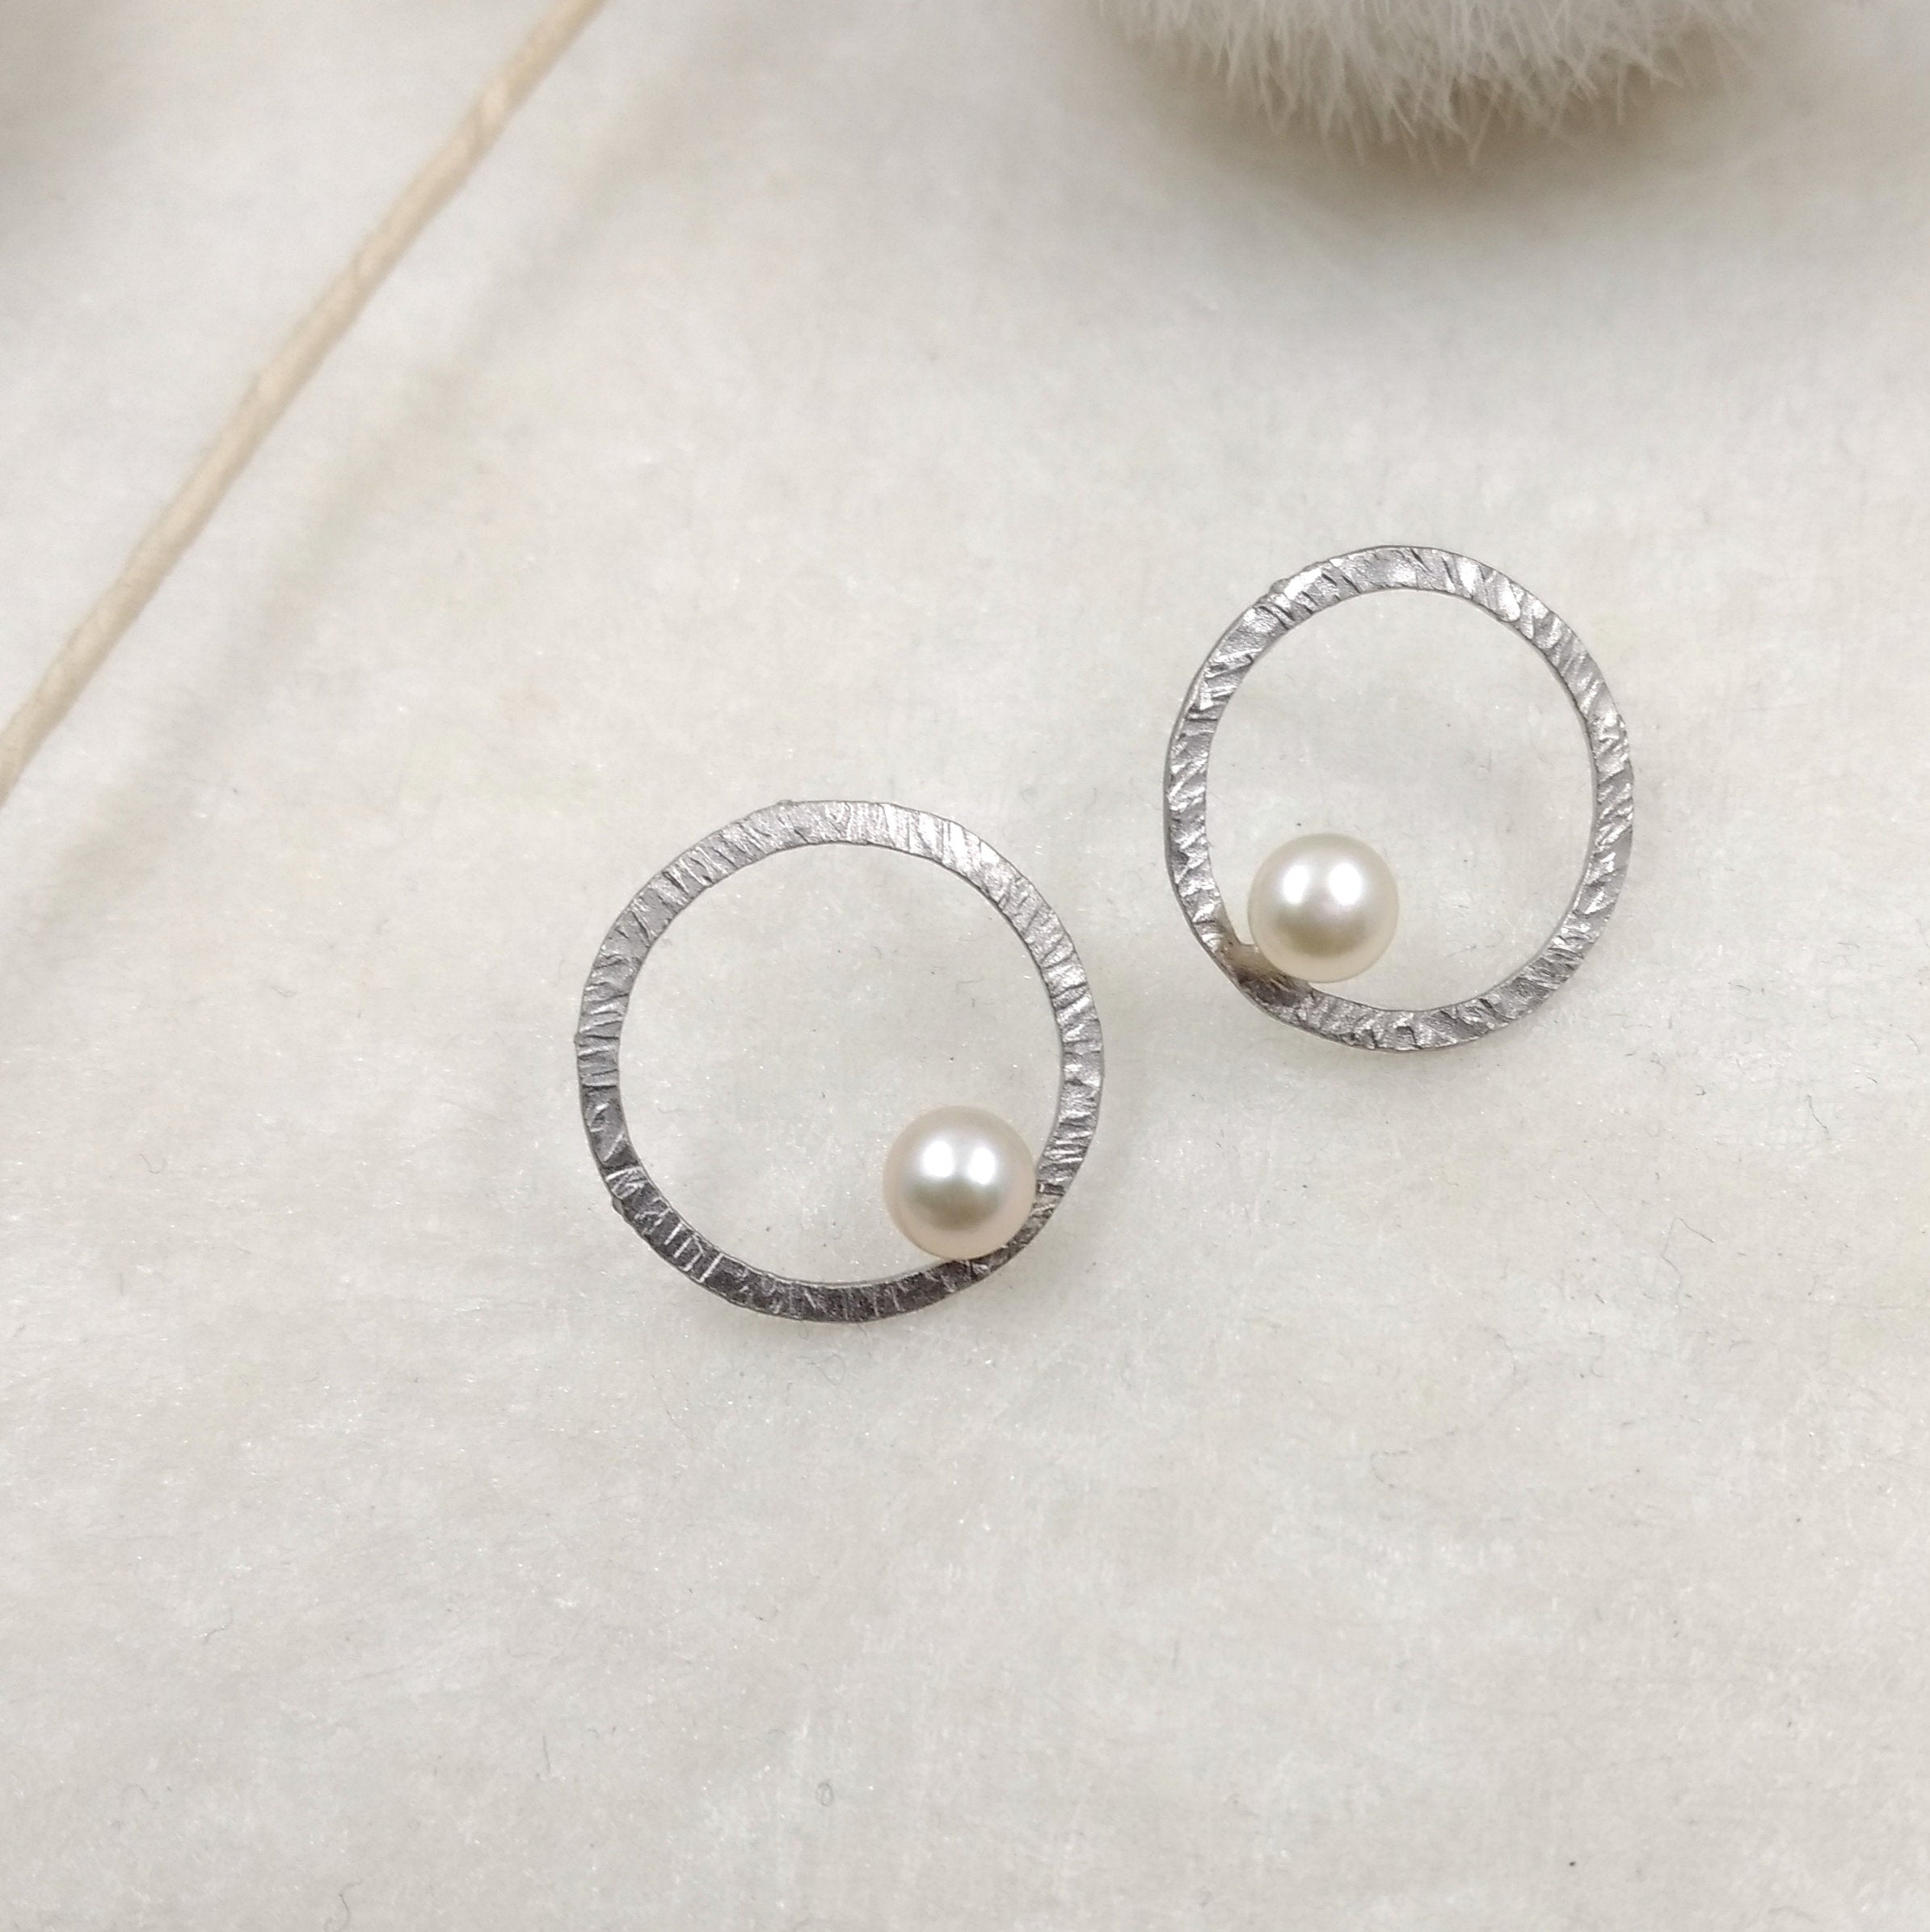 LaLune - small Silver buttons with pearls, available in 3 finishes